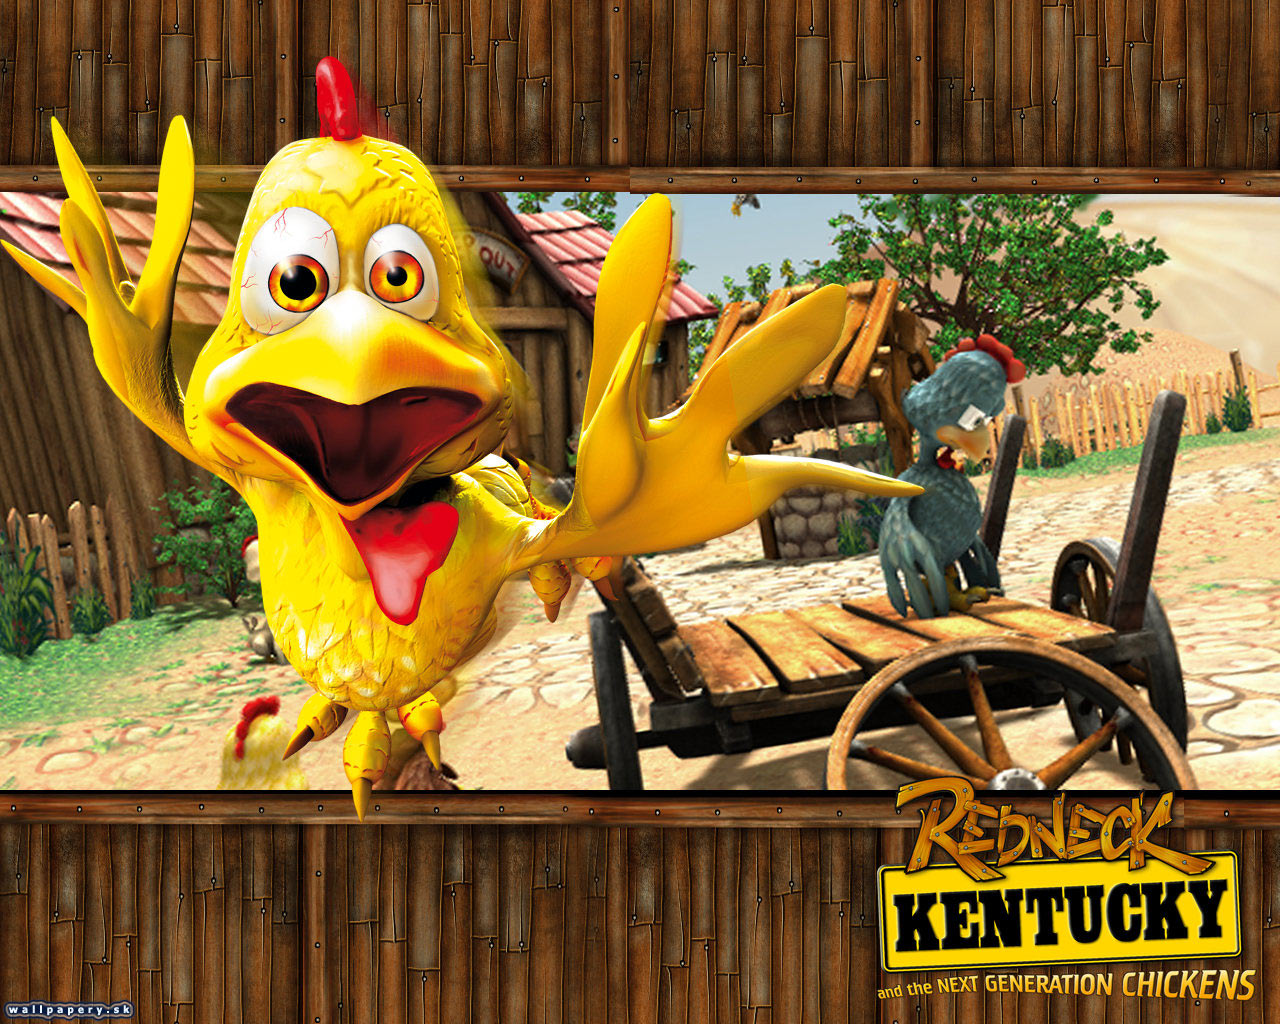 Redneck Kentucky and the Next Generation Chickens - wallpaper 4